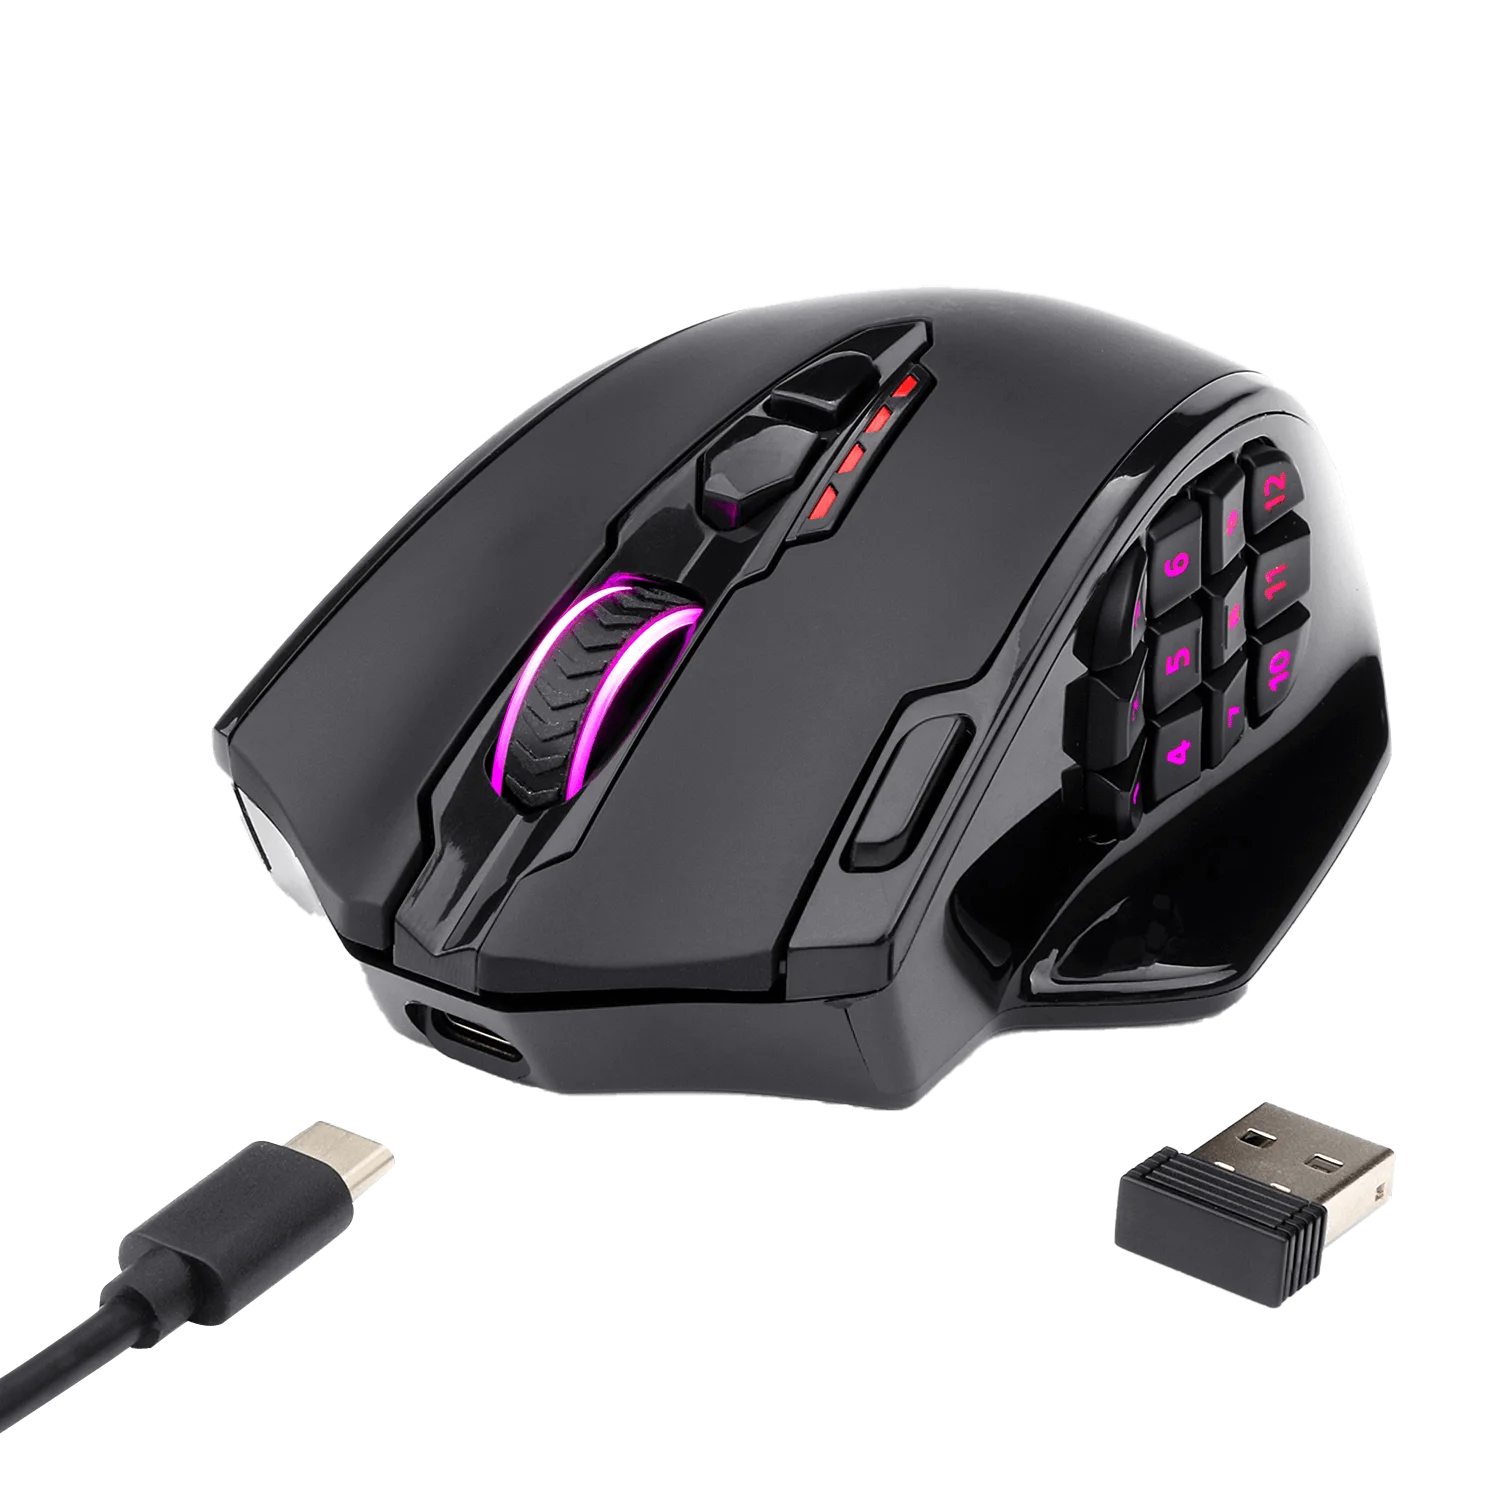 

New Redragon M913 2.4G Wireless Gaming Mouse 16000 DPI RGB Gaming Mouse With 16 Programmable Buttons MMO Fps For Gamer Laptop